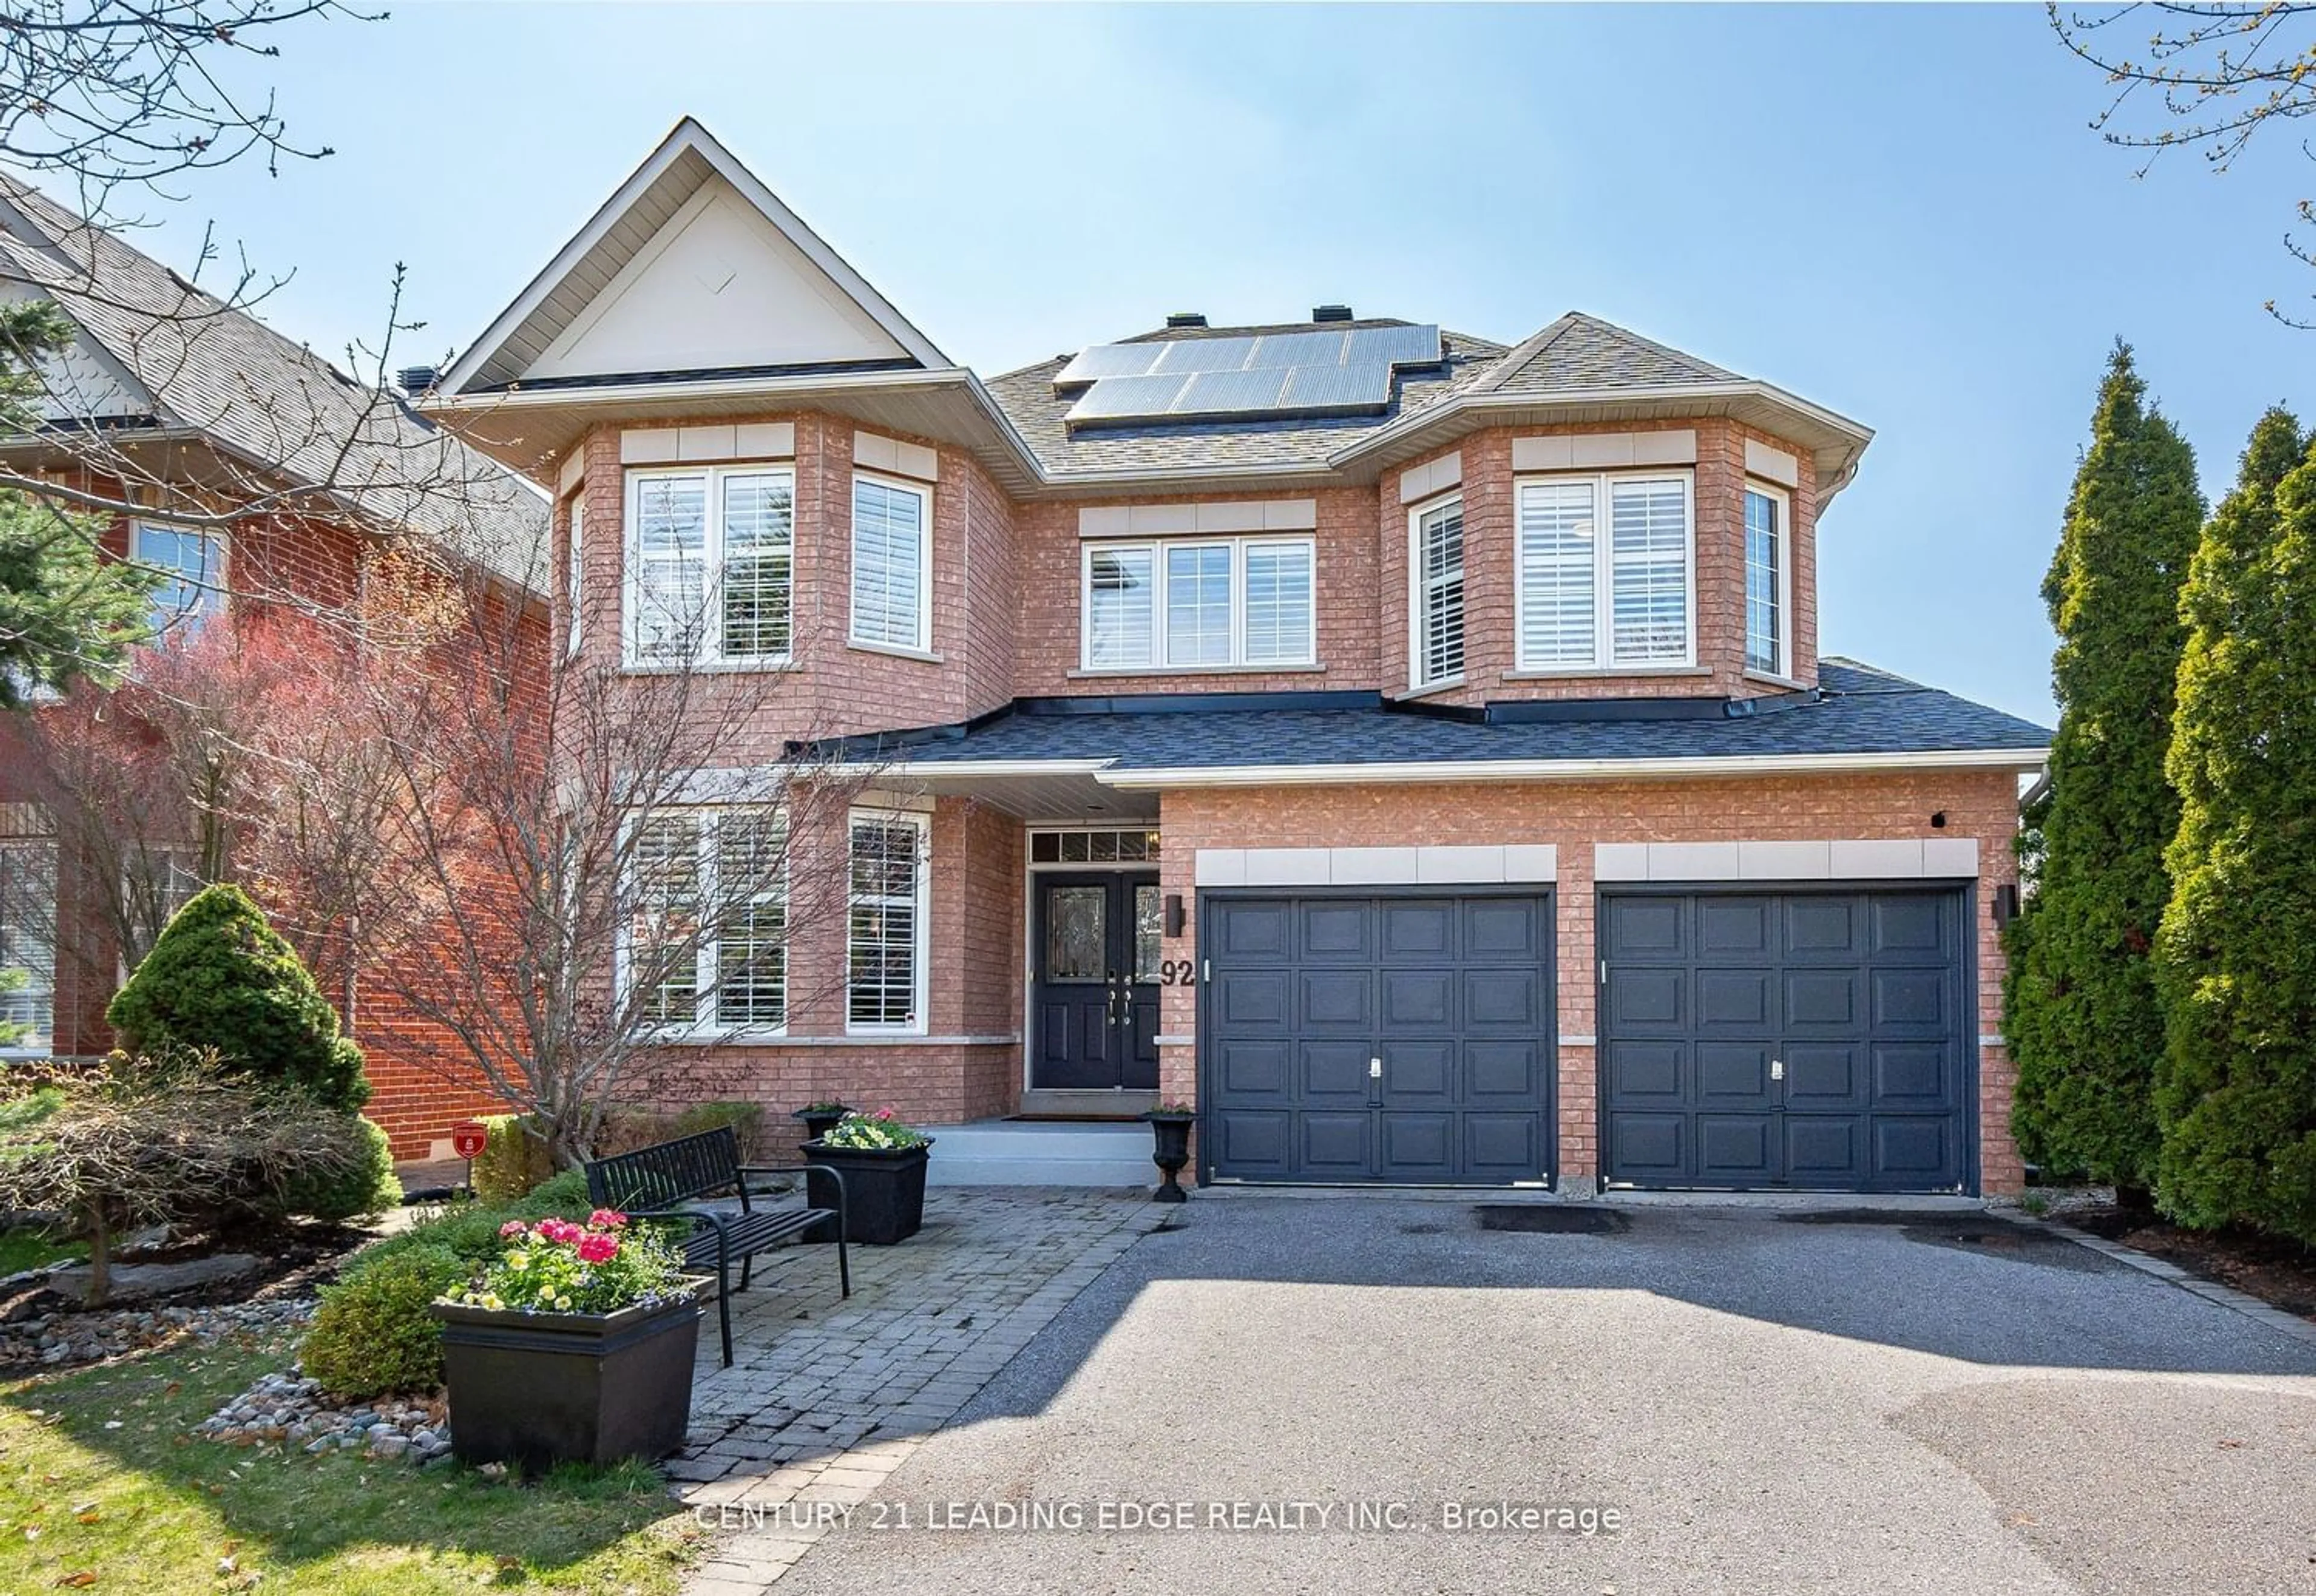 Home with brick exterior material for 92 Red Ash Dr, Markham Ontario L3S 4L2